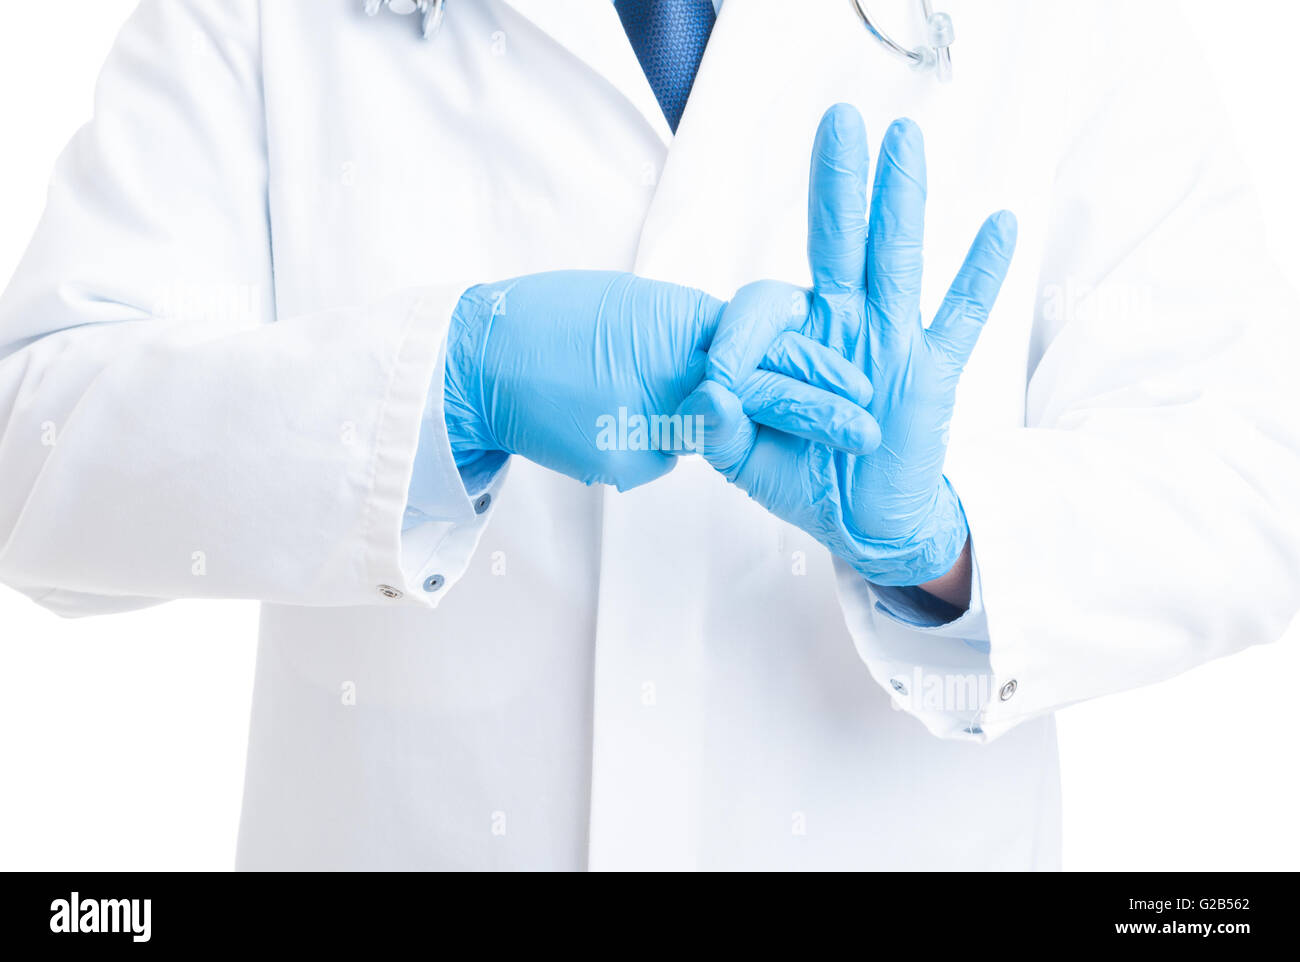 Proctoligist hands making rectal exam gesture using two fingers and rubber or latex gloves Stock Photo